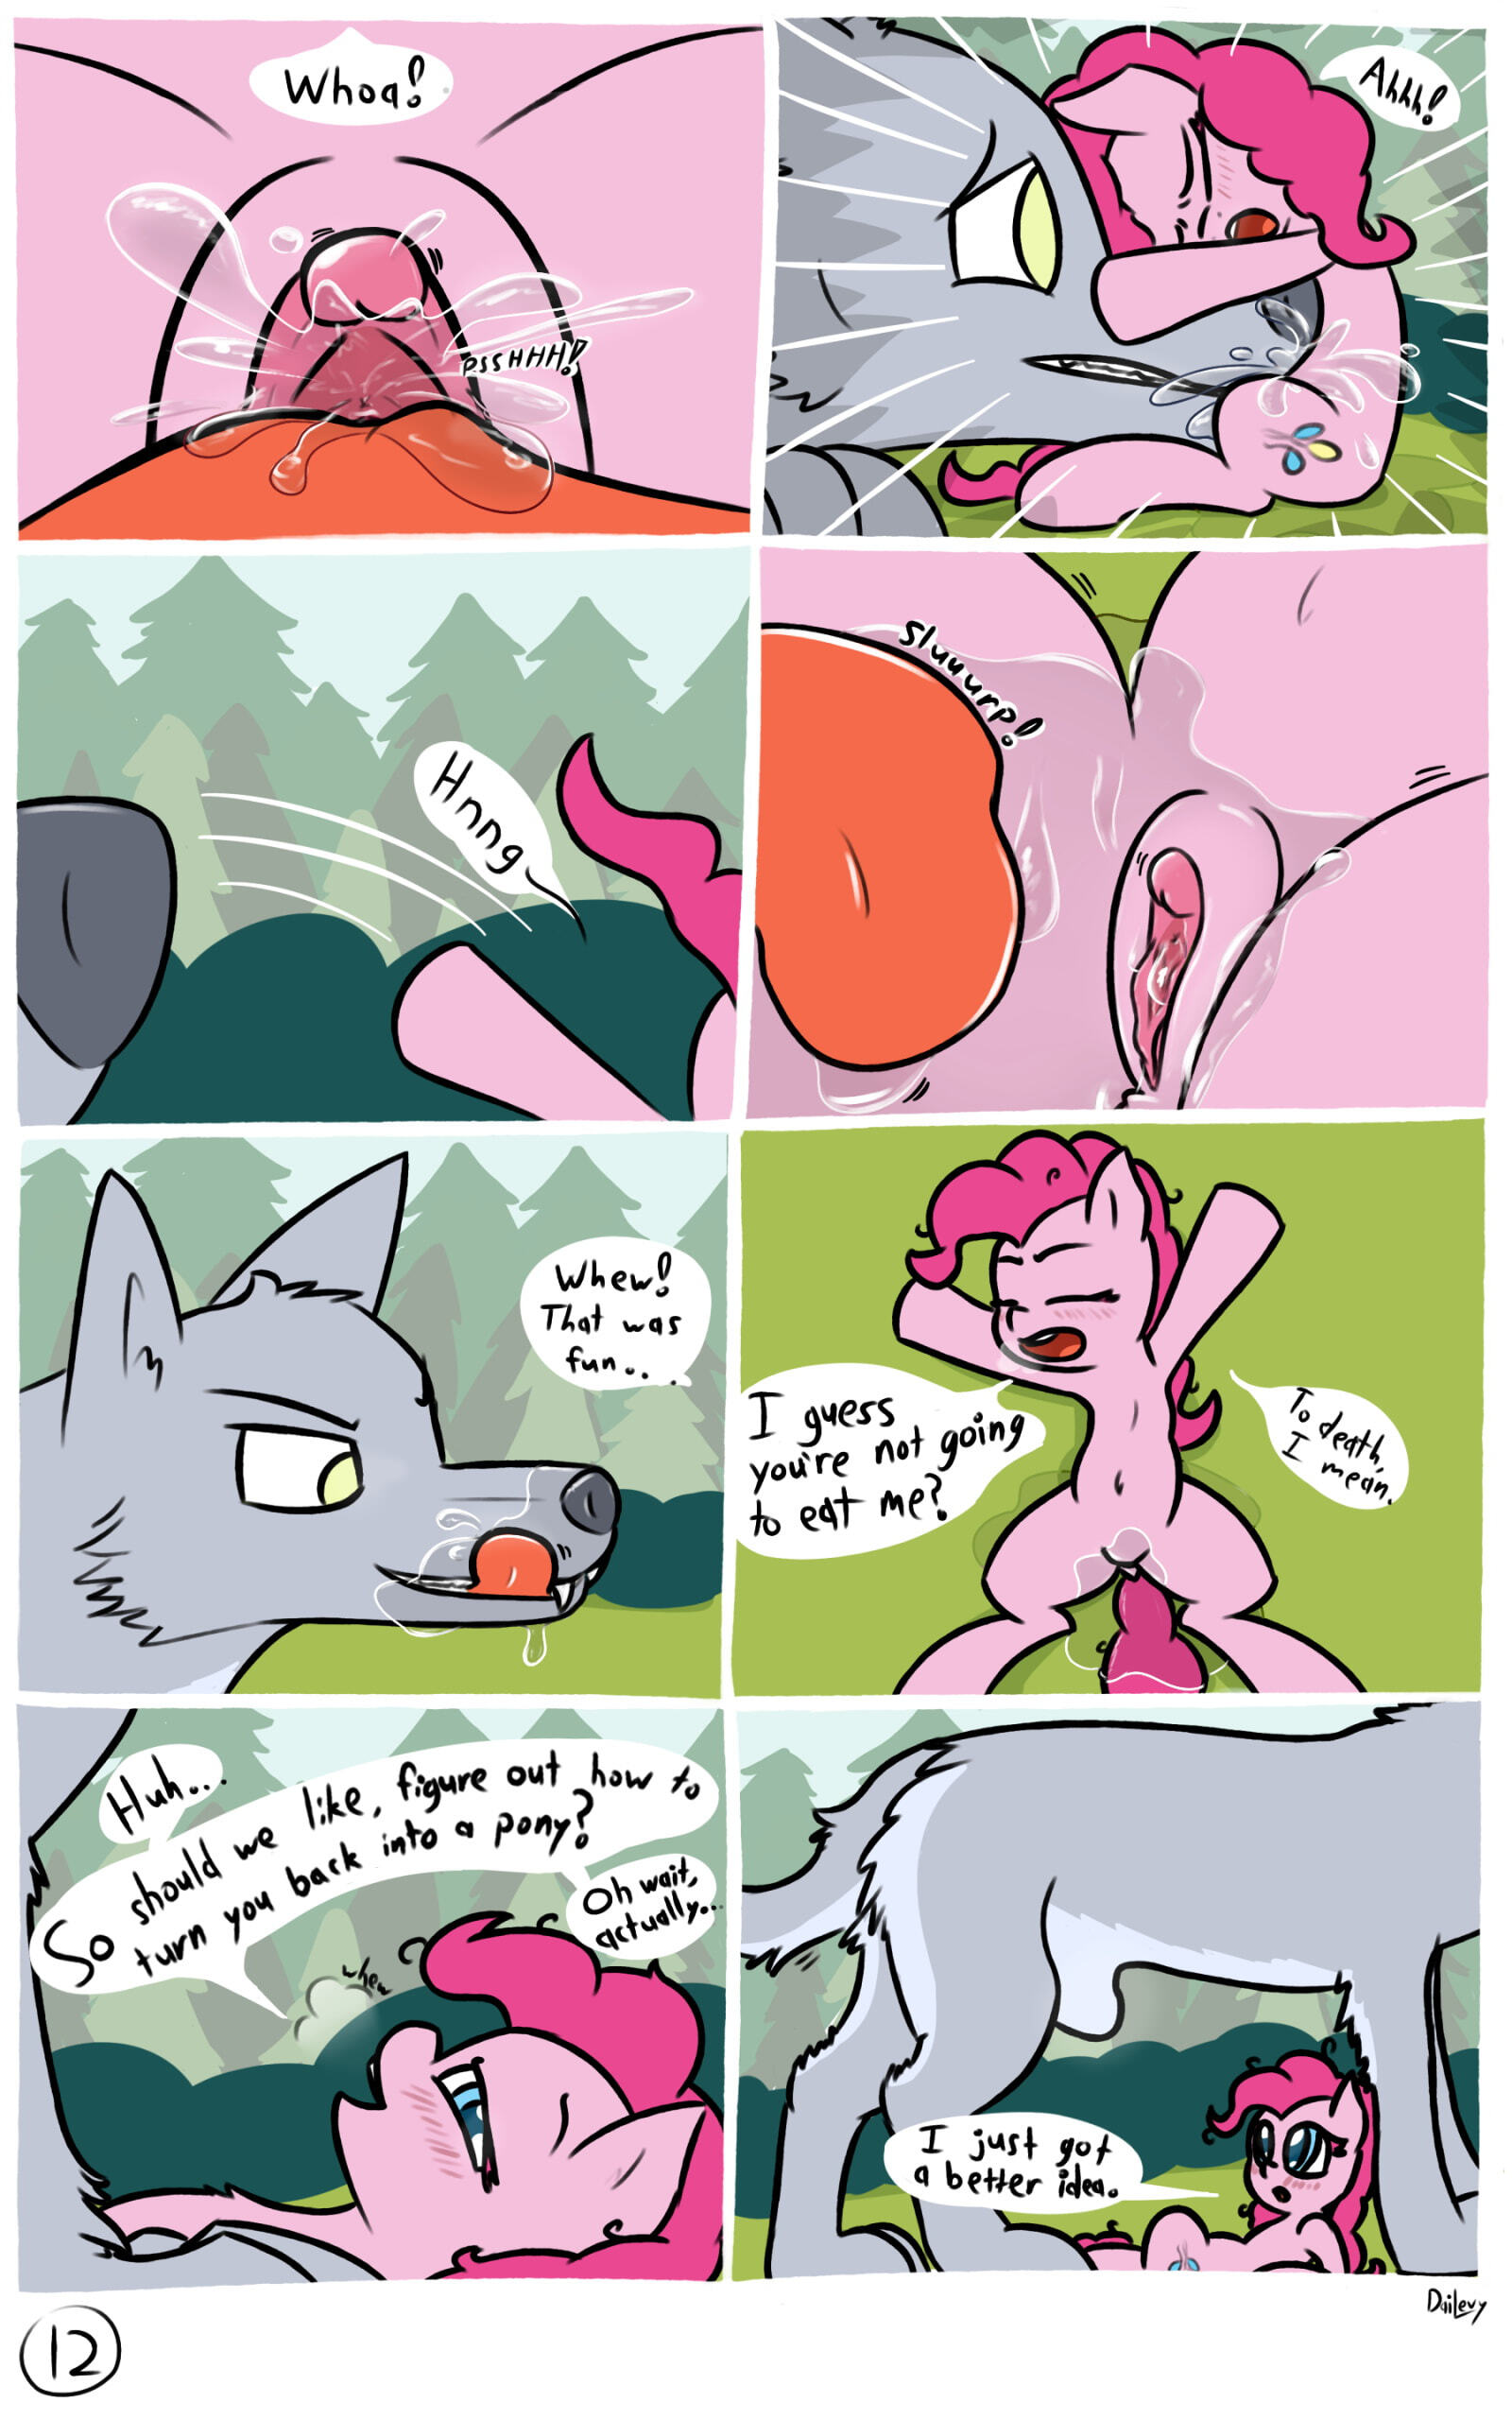 Twilight's Book of Transmogrification Chapter 1: Day of the Dog - Page 13